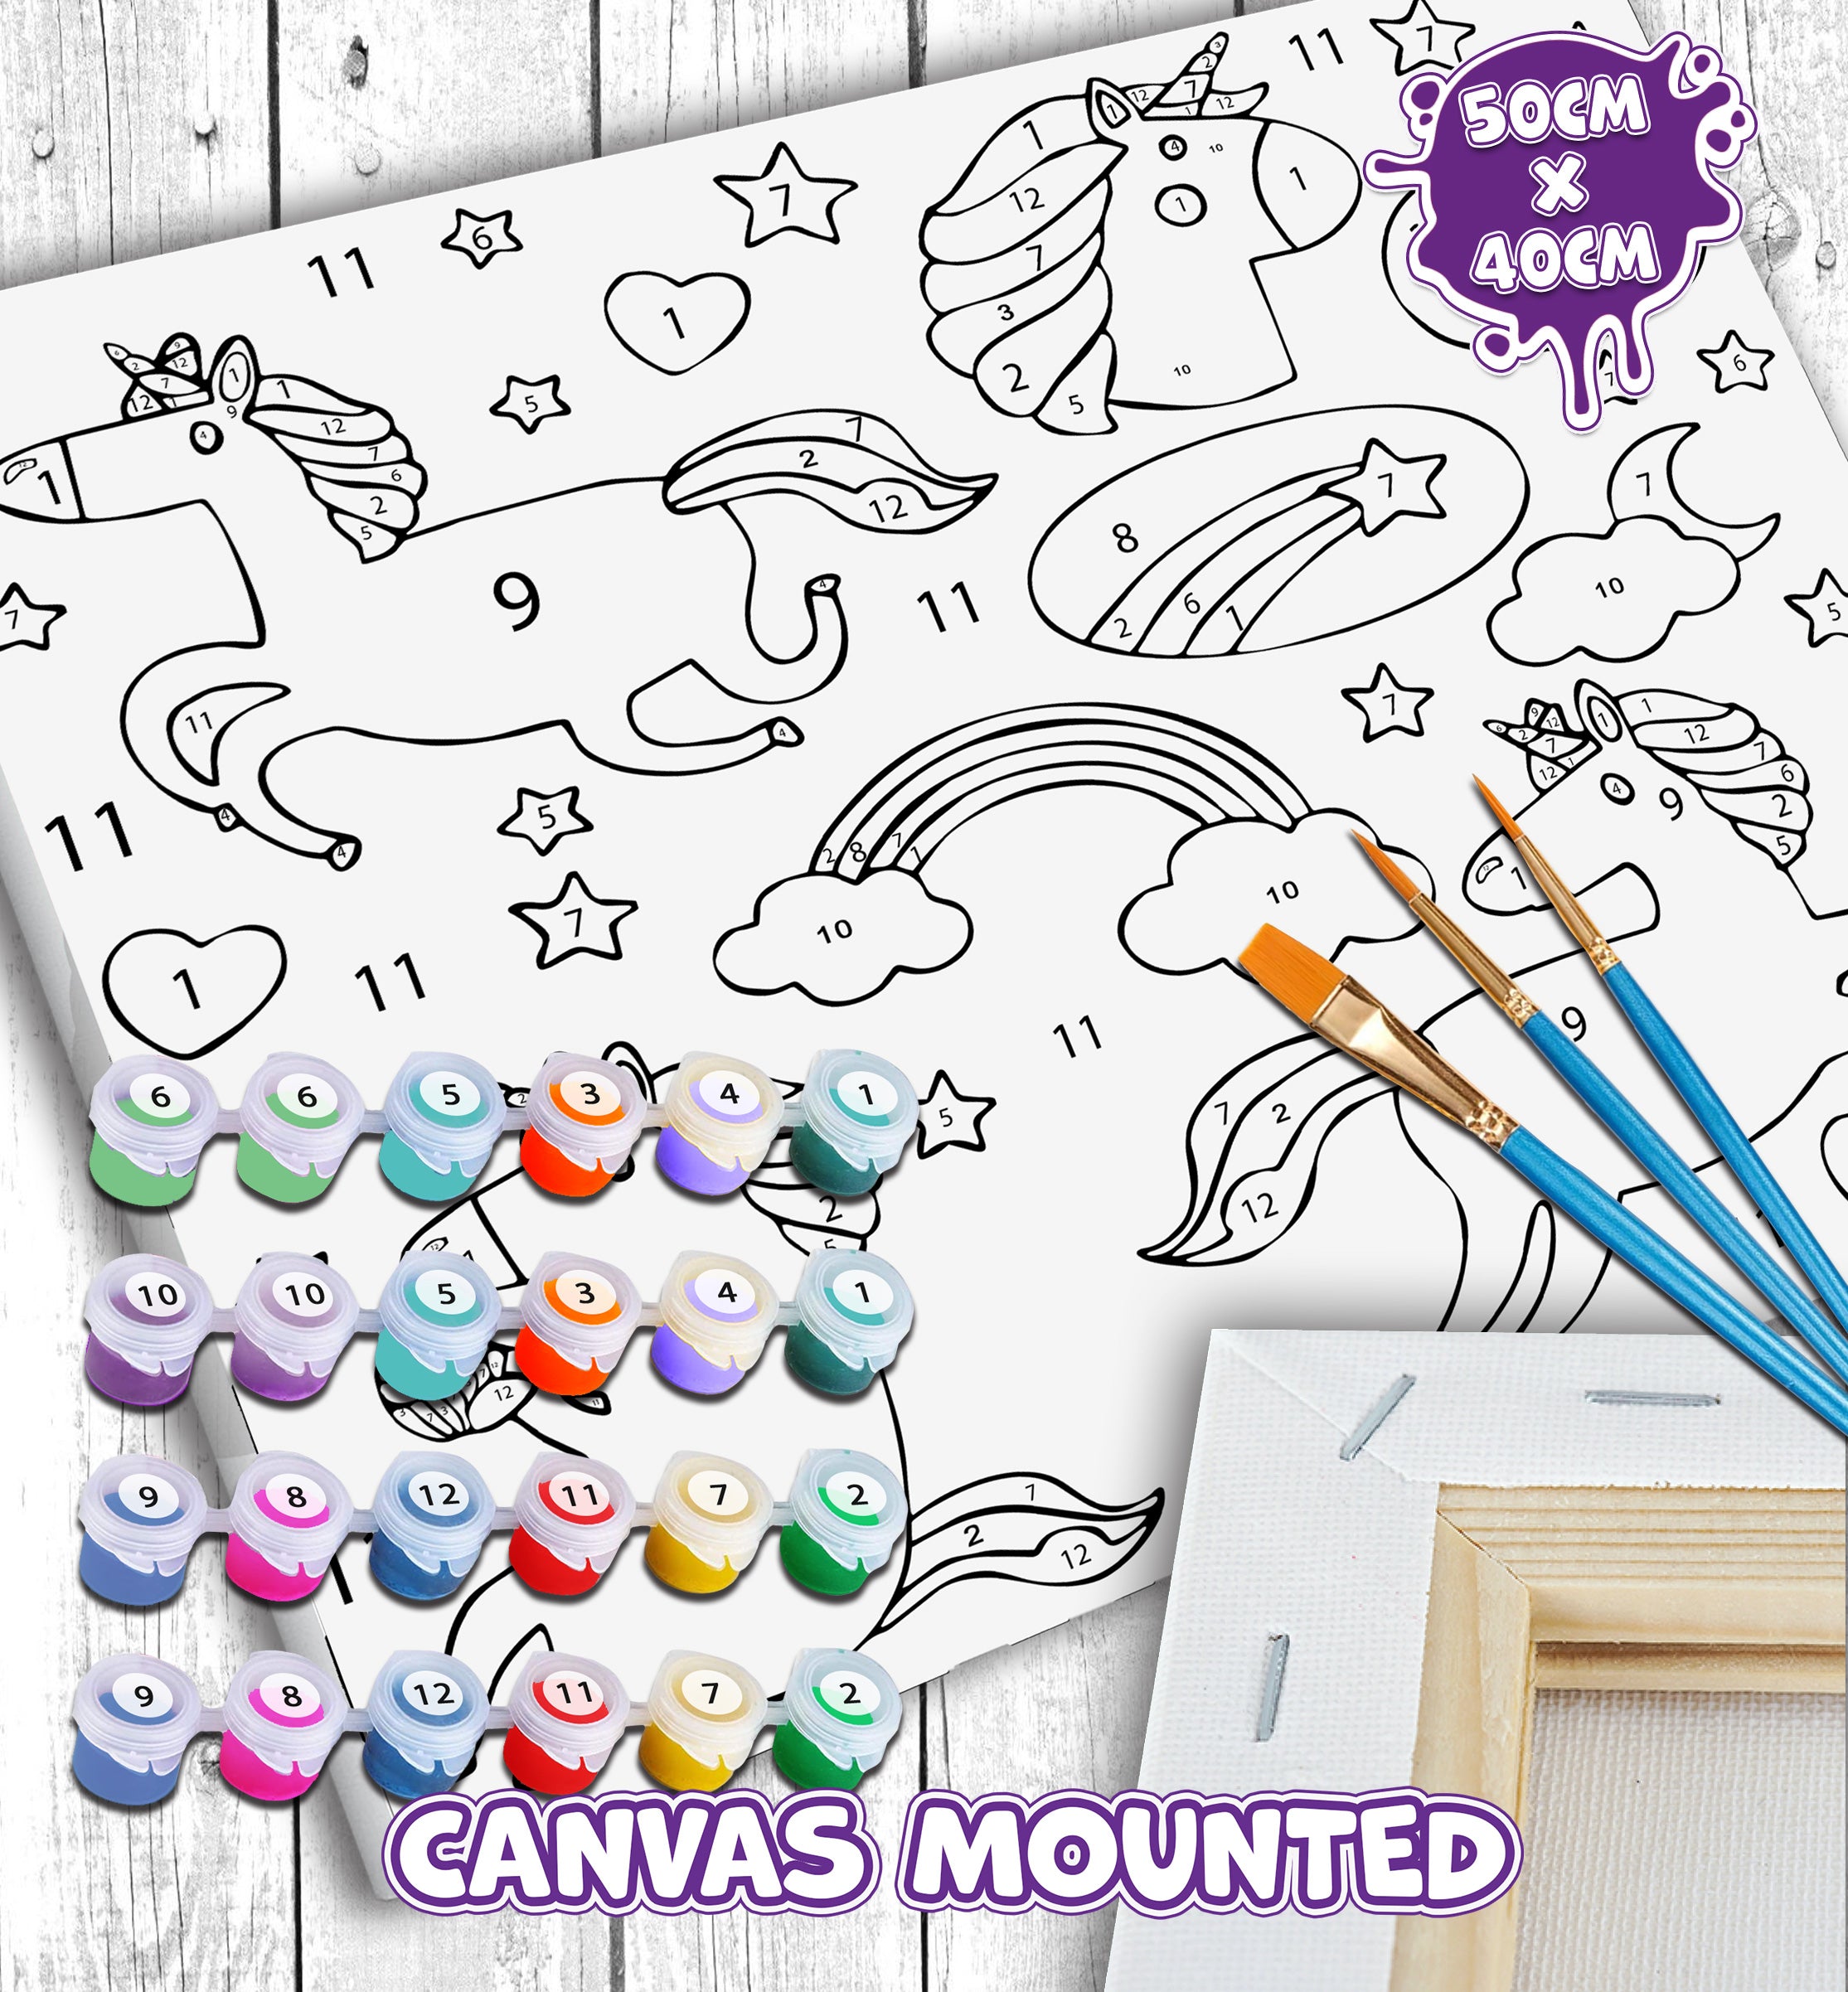 Unicorn paint by number, unicorn painting, unicorn painting for kids, unicorn painting easy, unicorn painting by numbers uk, unicorn painting set, washable acrylic paints, Unicorn gifts for girls, paint by number on canvas, paint by numbers ready for wall mounting, paint by numbers for kids, paint by numbers for beginners, paint by numbers for children, paint by numbers with frame, 